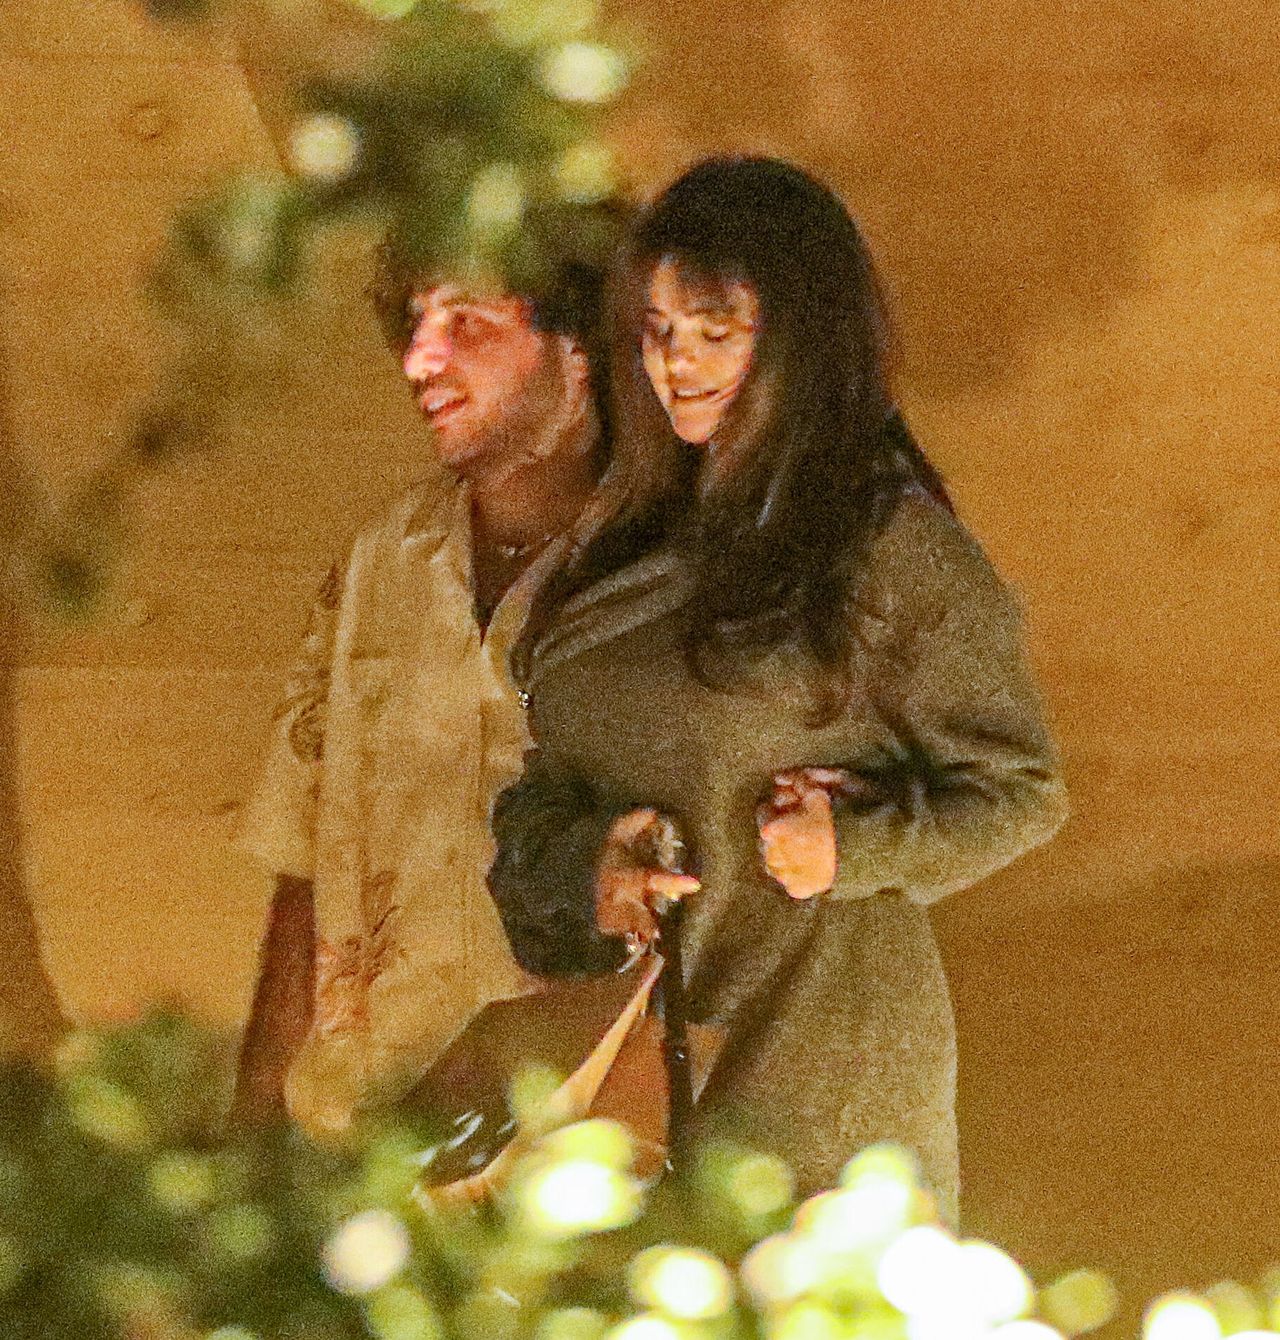 Selena Gomez and Benny Blanco "caught" on a date.